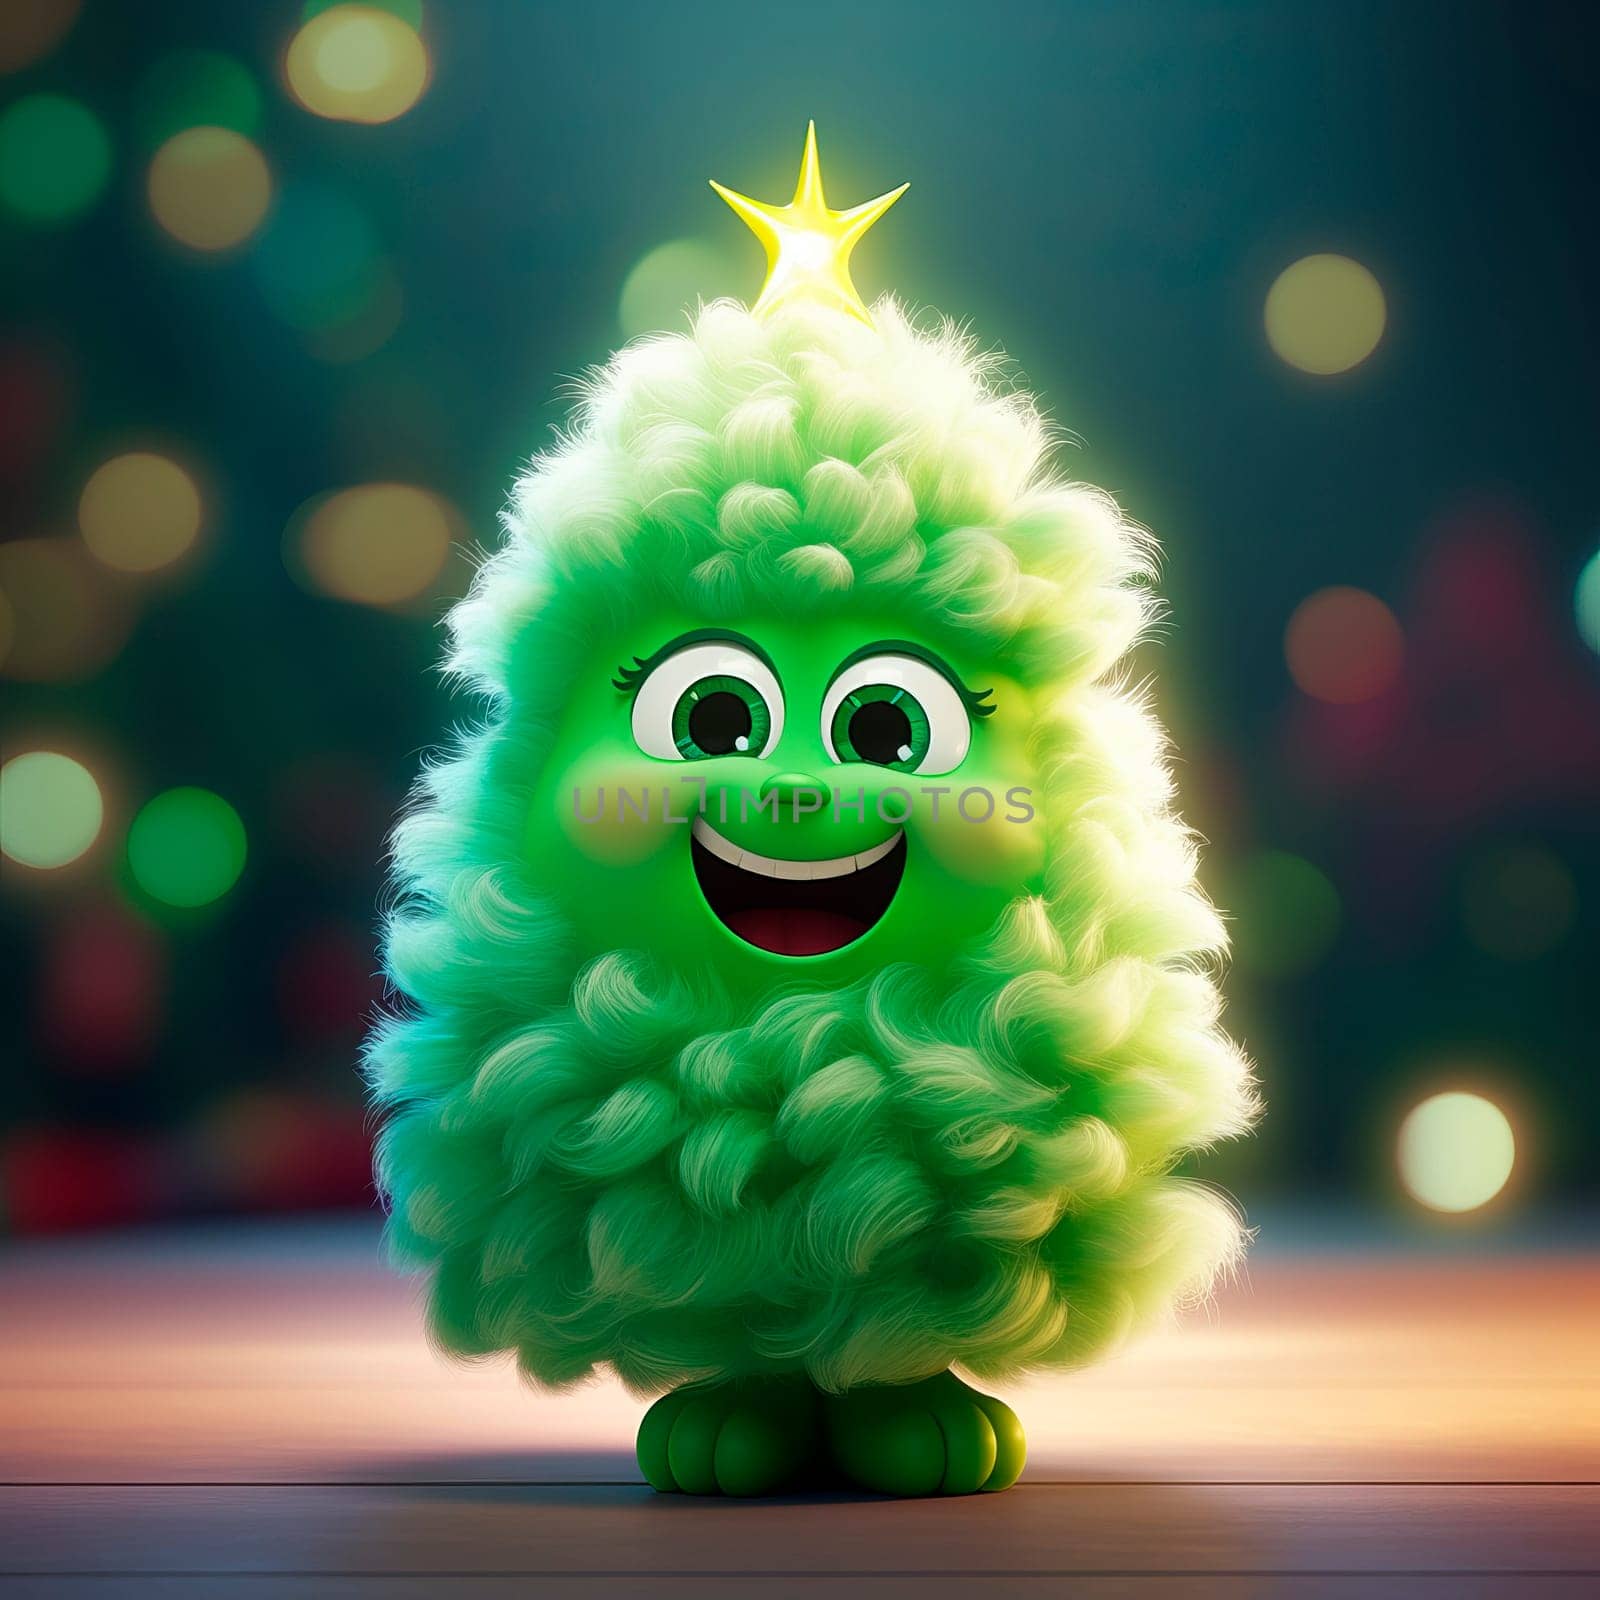 Cute Christmas tree on a New Year background.